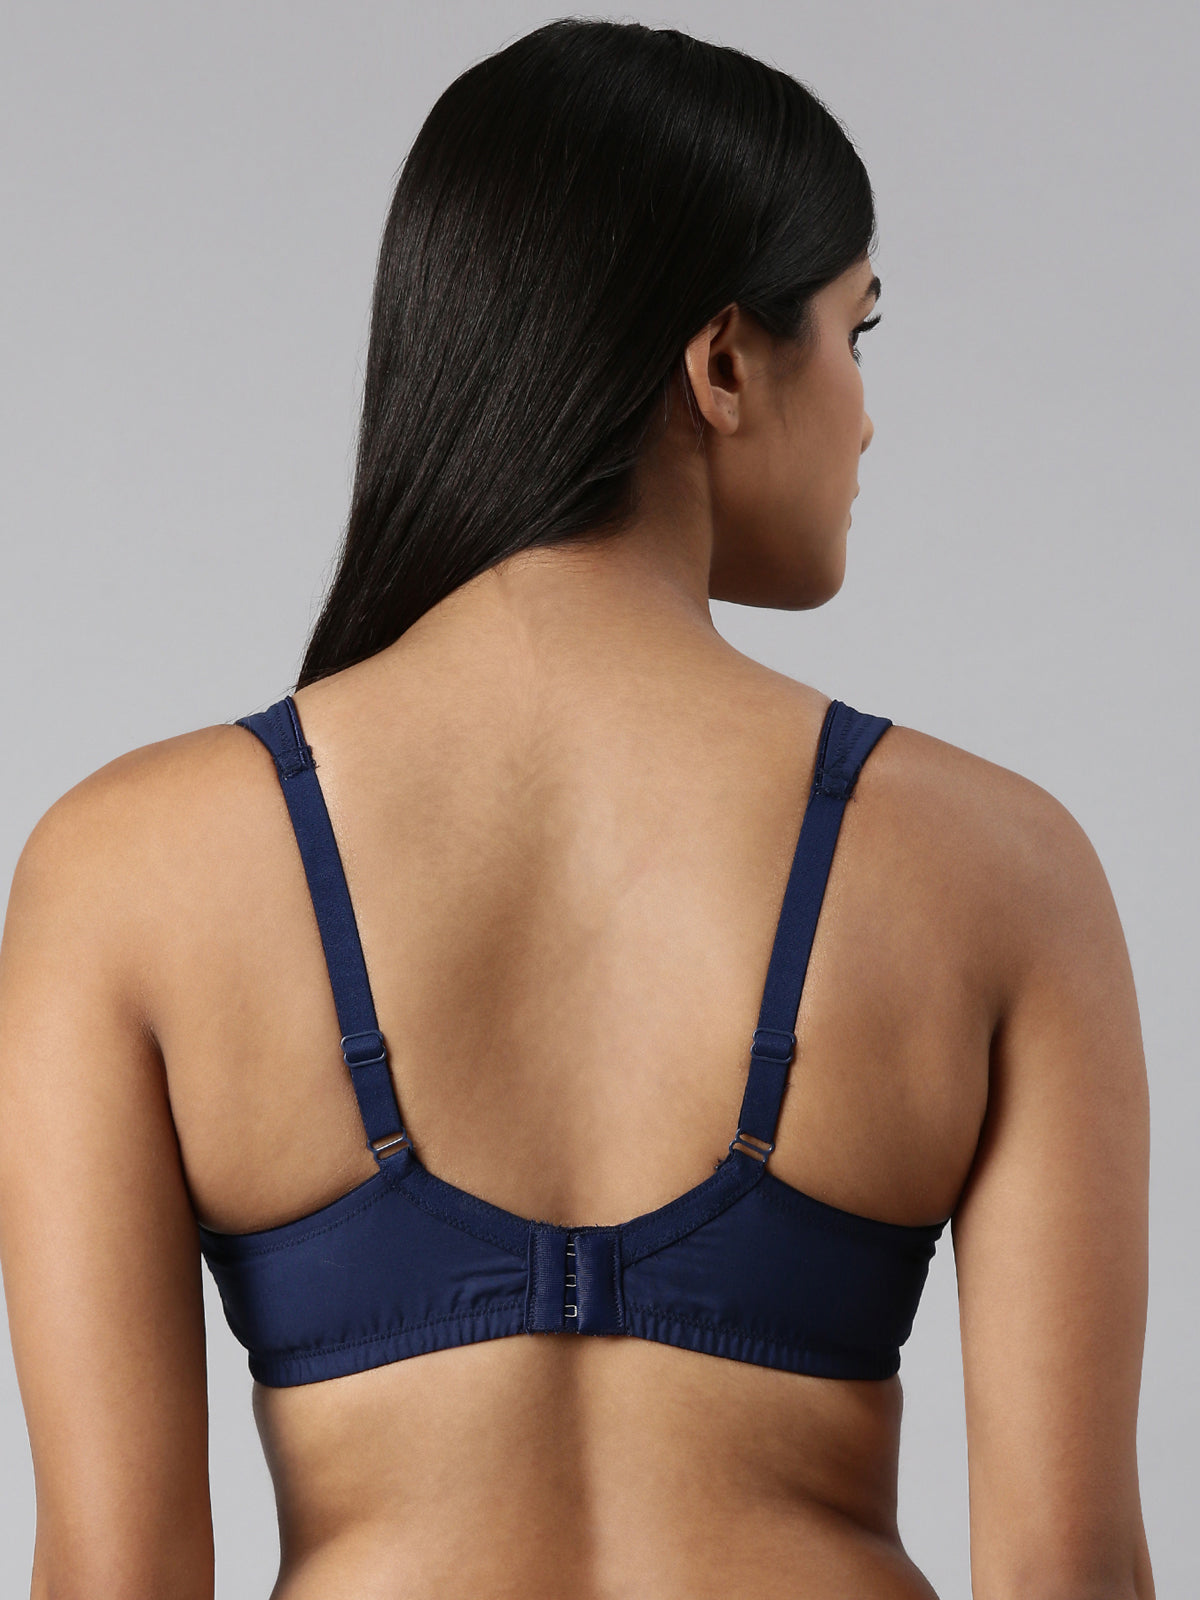 blossom-circlet-navy blue4-woven knitted-support bra